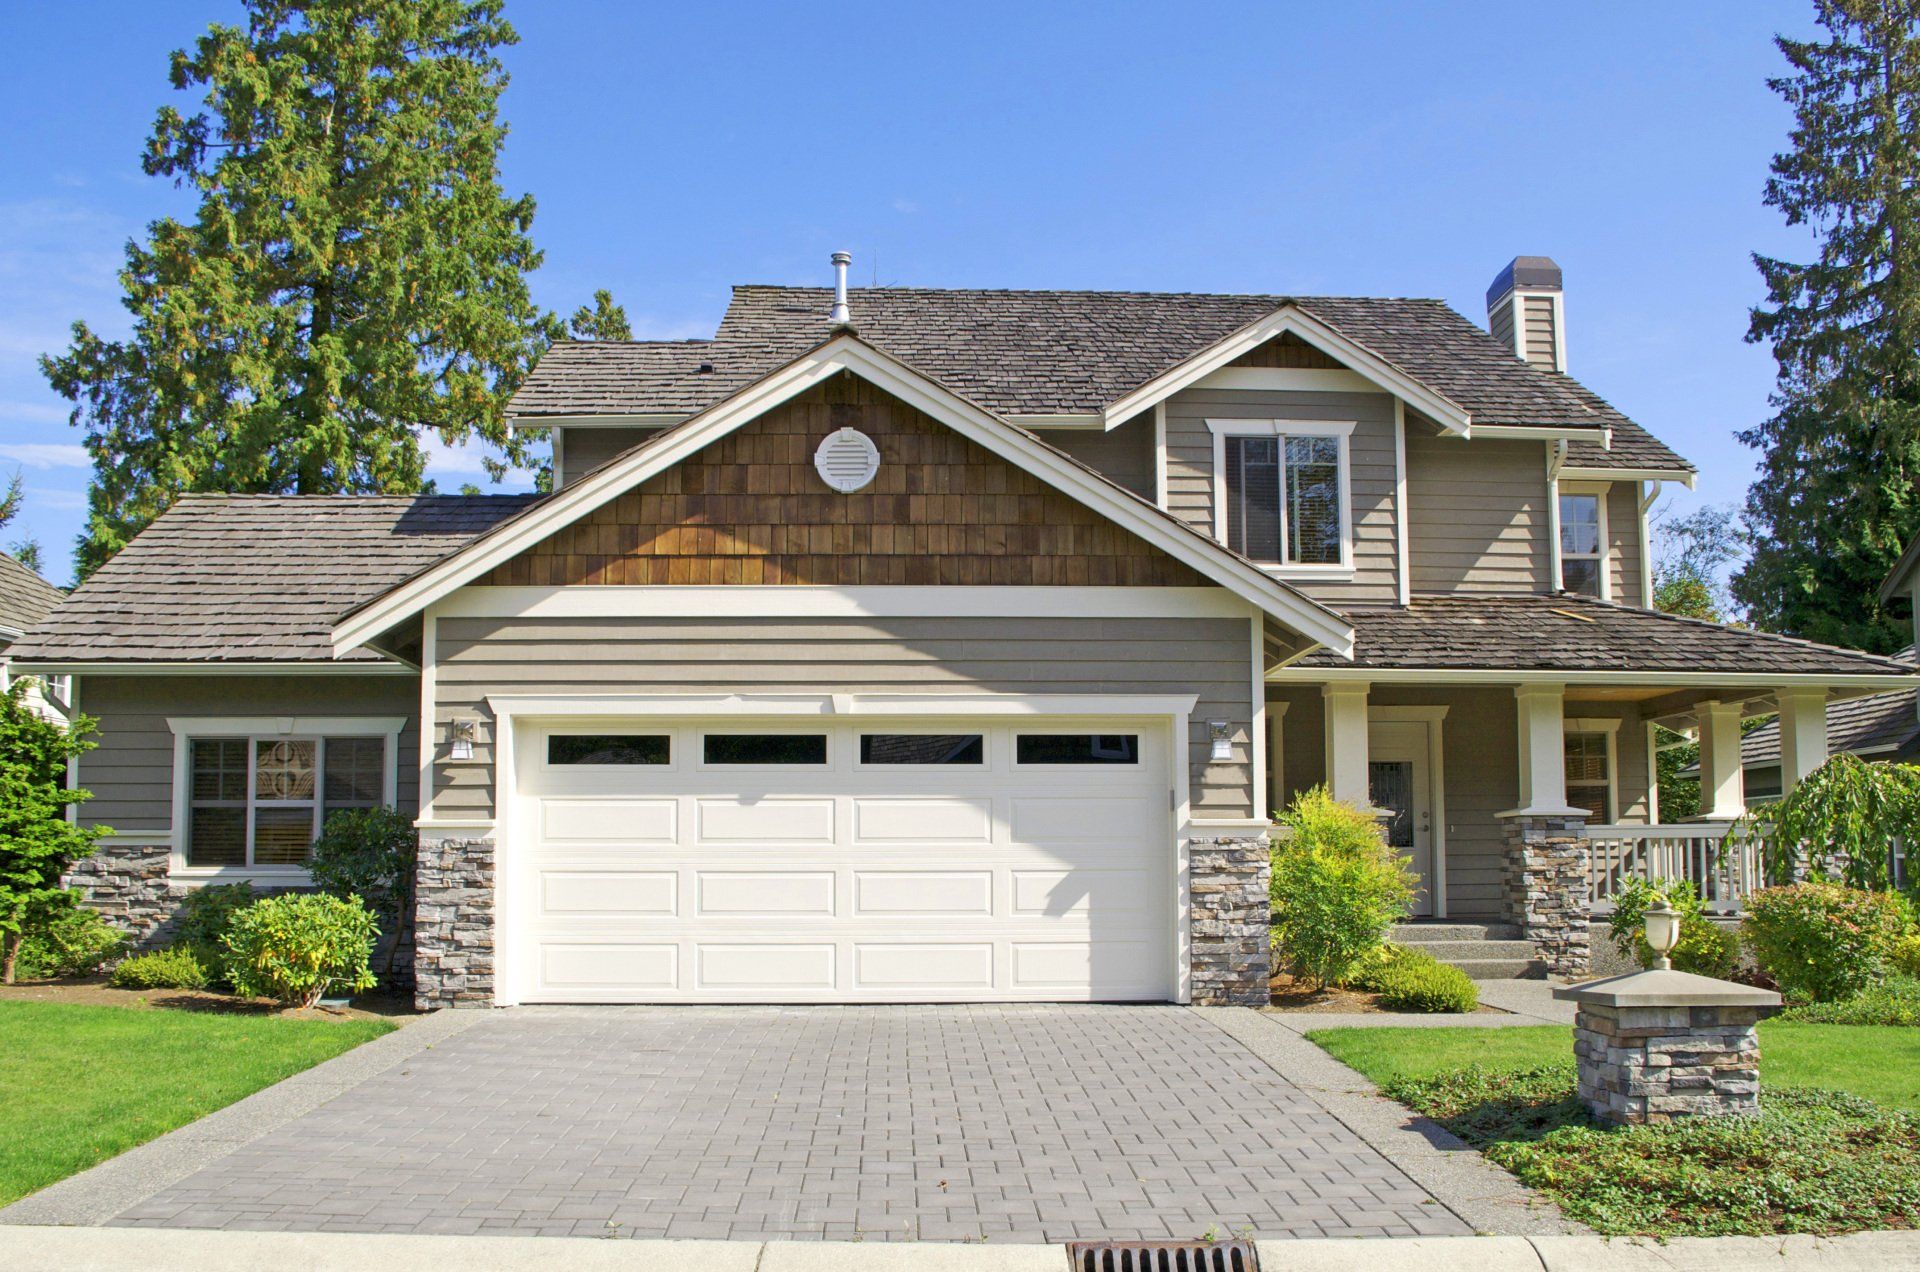 Modern style home boasts two car garage framed by blue siding and natural stone wall trim.